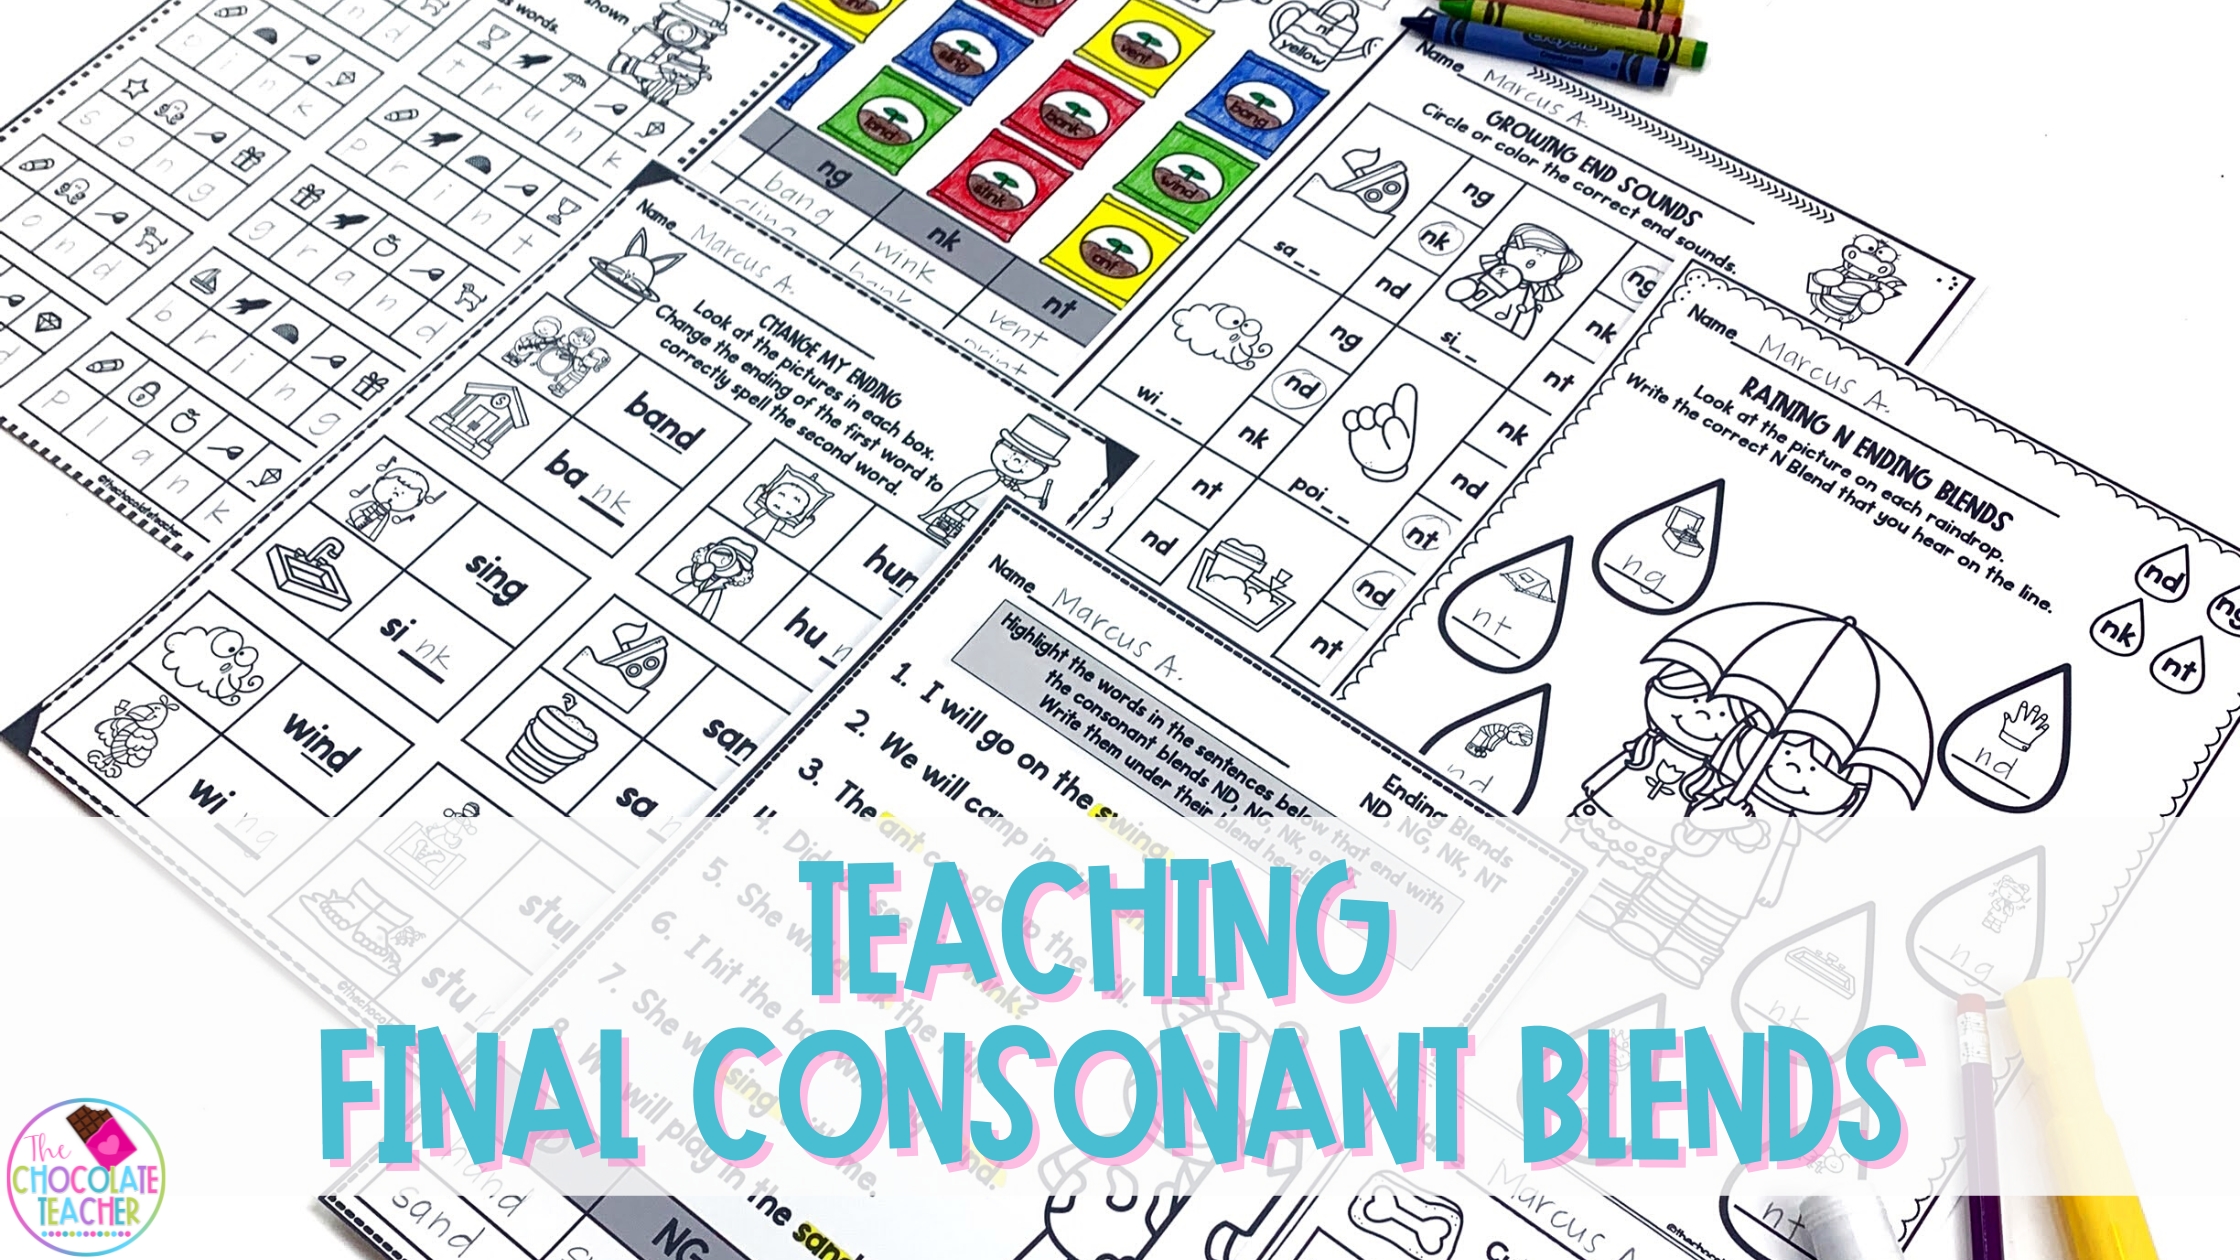 Teaching final consonant blends to your first graders is fun and easy with these engaging activities they will love.